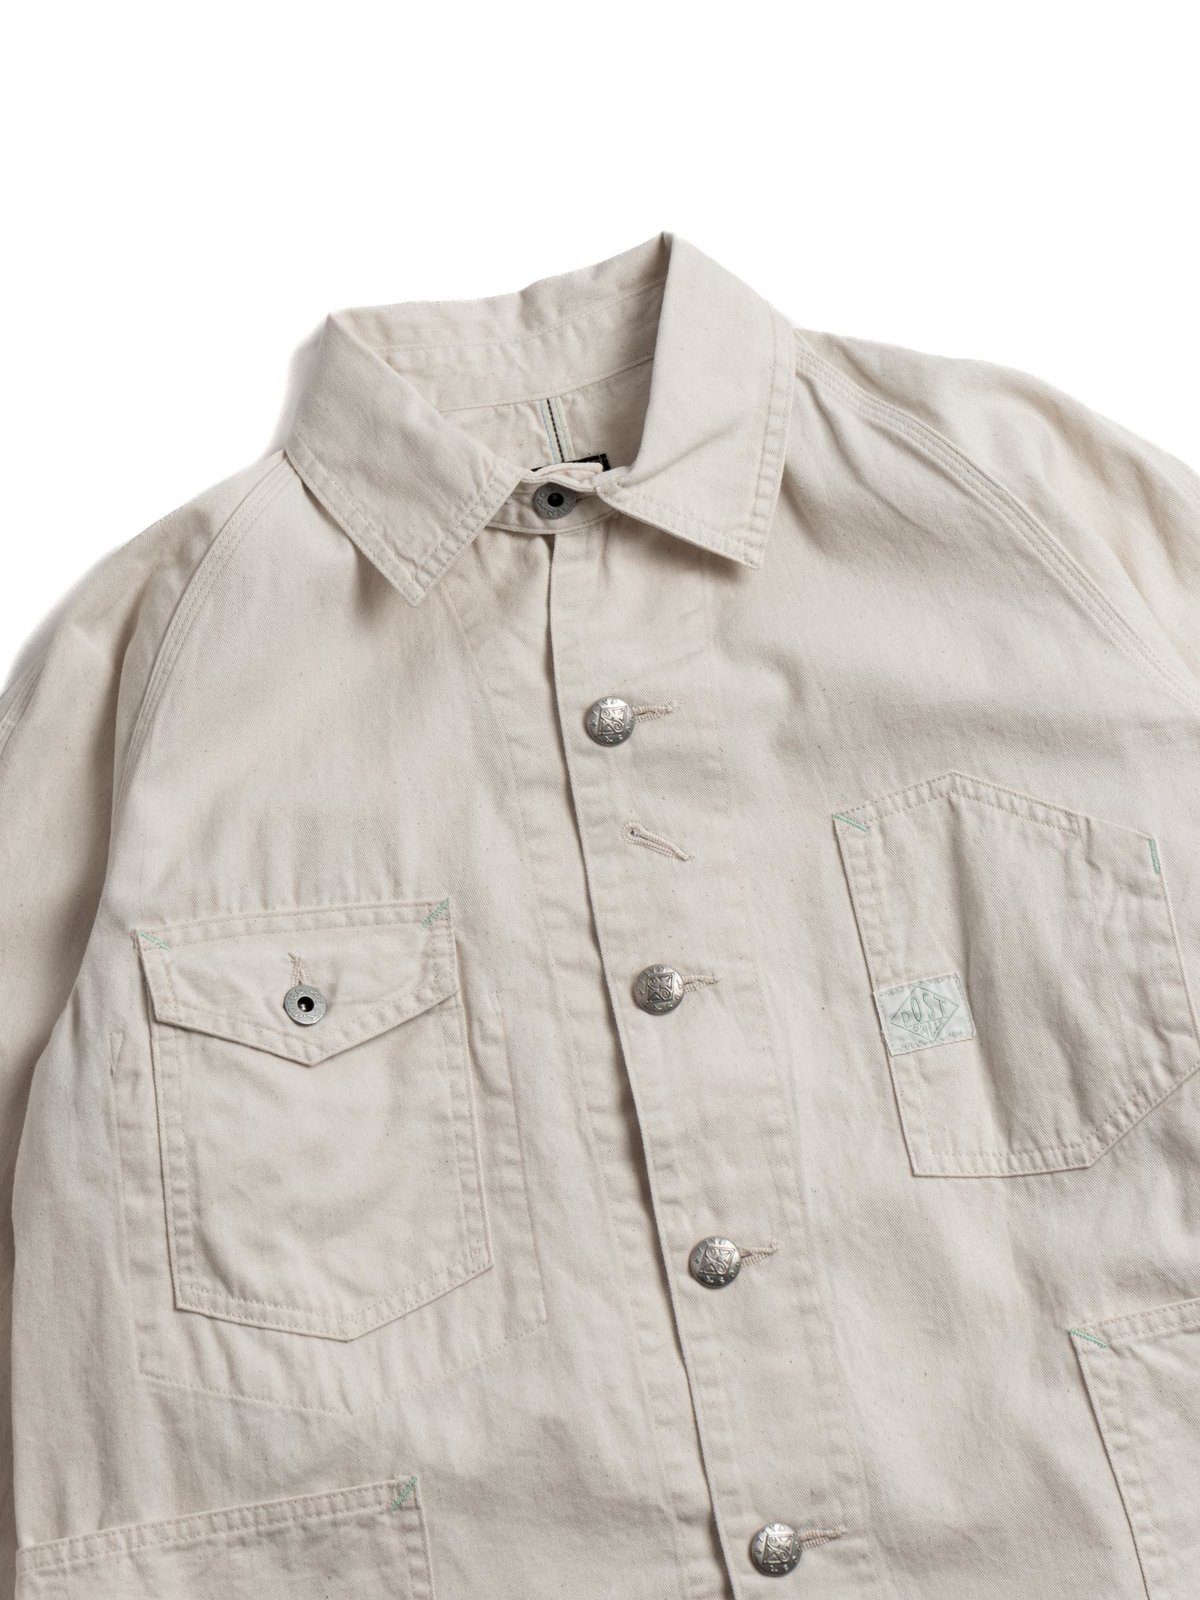 ENGINEER’S JACKET COTTON DRILL NATURAL - Image 2